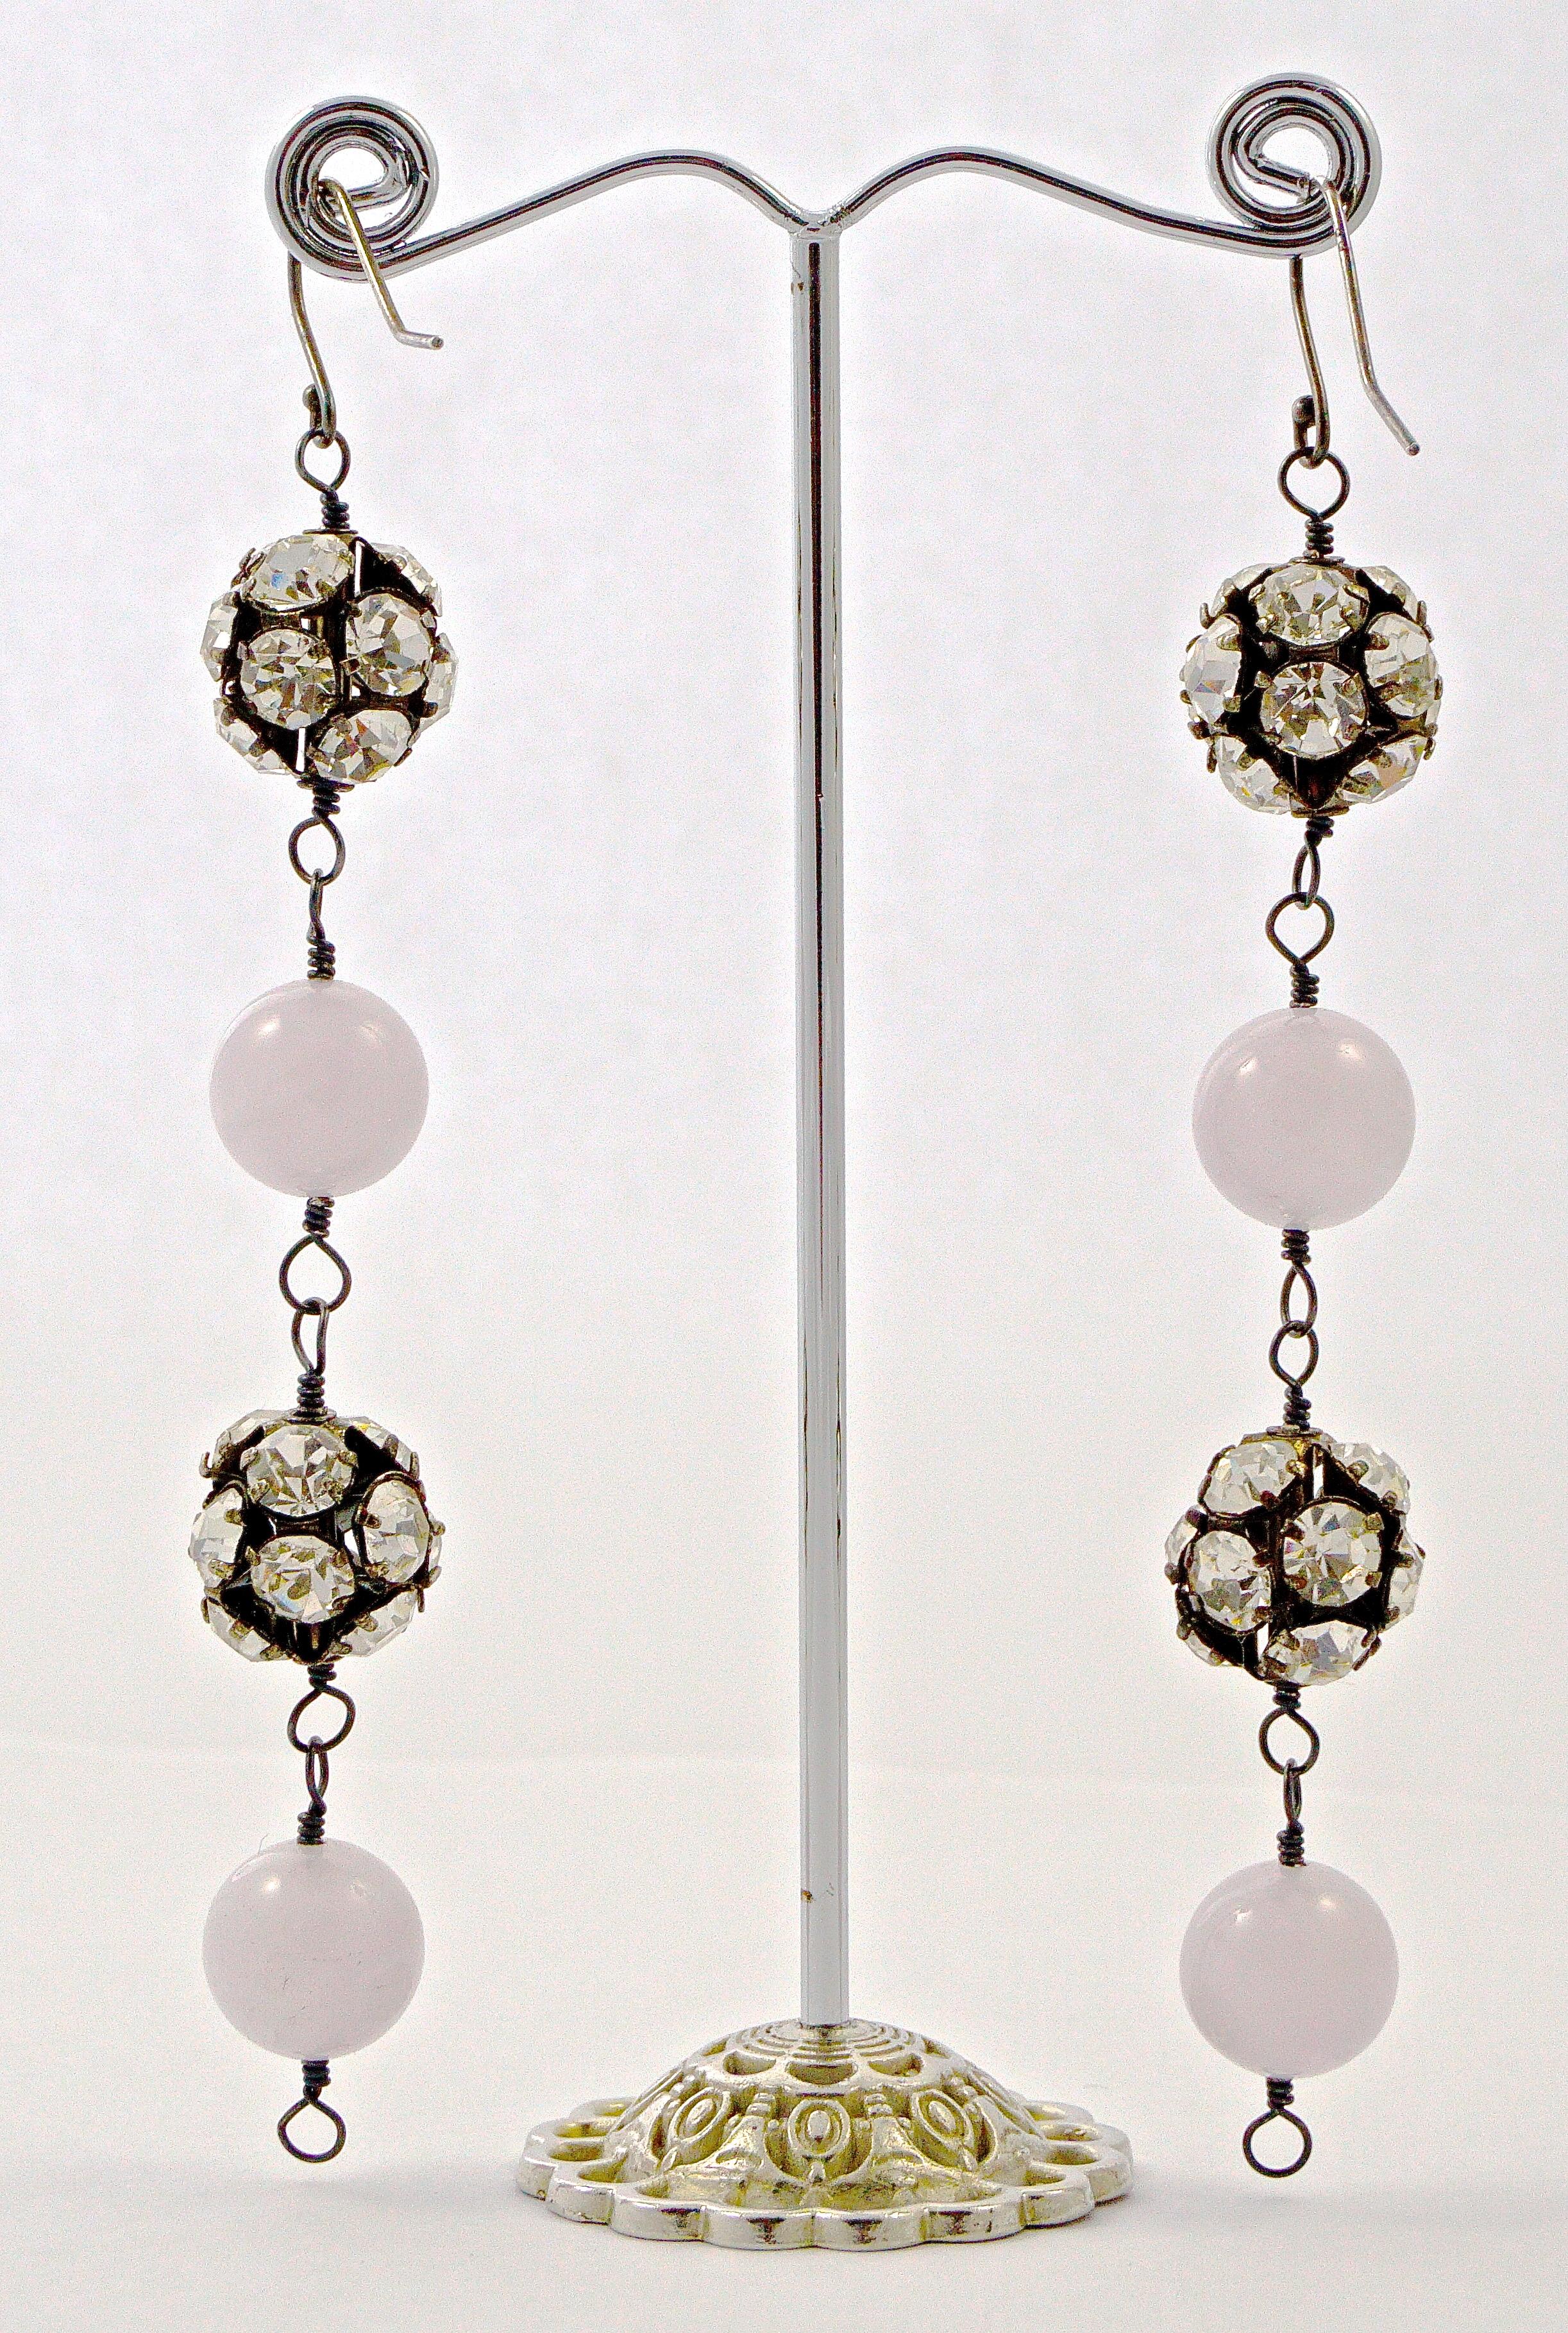 Silver and Rhinestone Ball Pale Lavender Semi Precious Gemstone Drop Earrings In Good Condition For Sale In London, GB